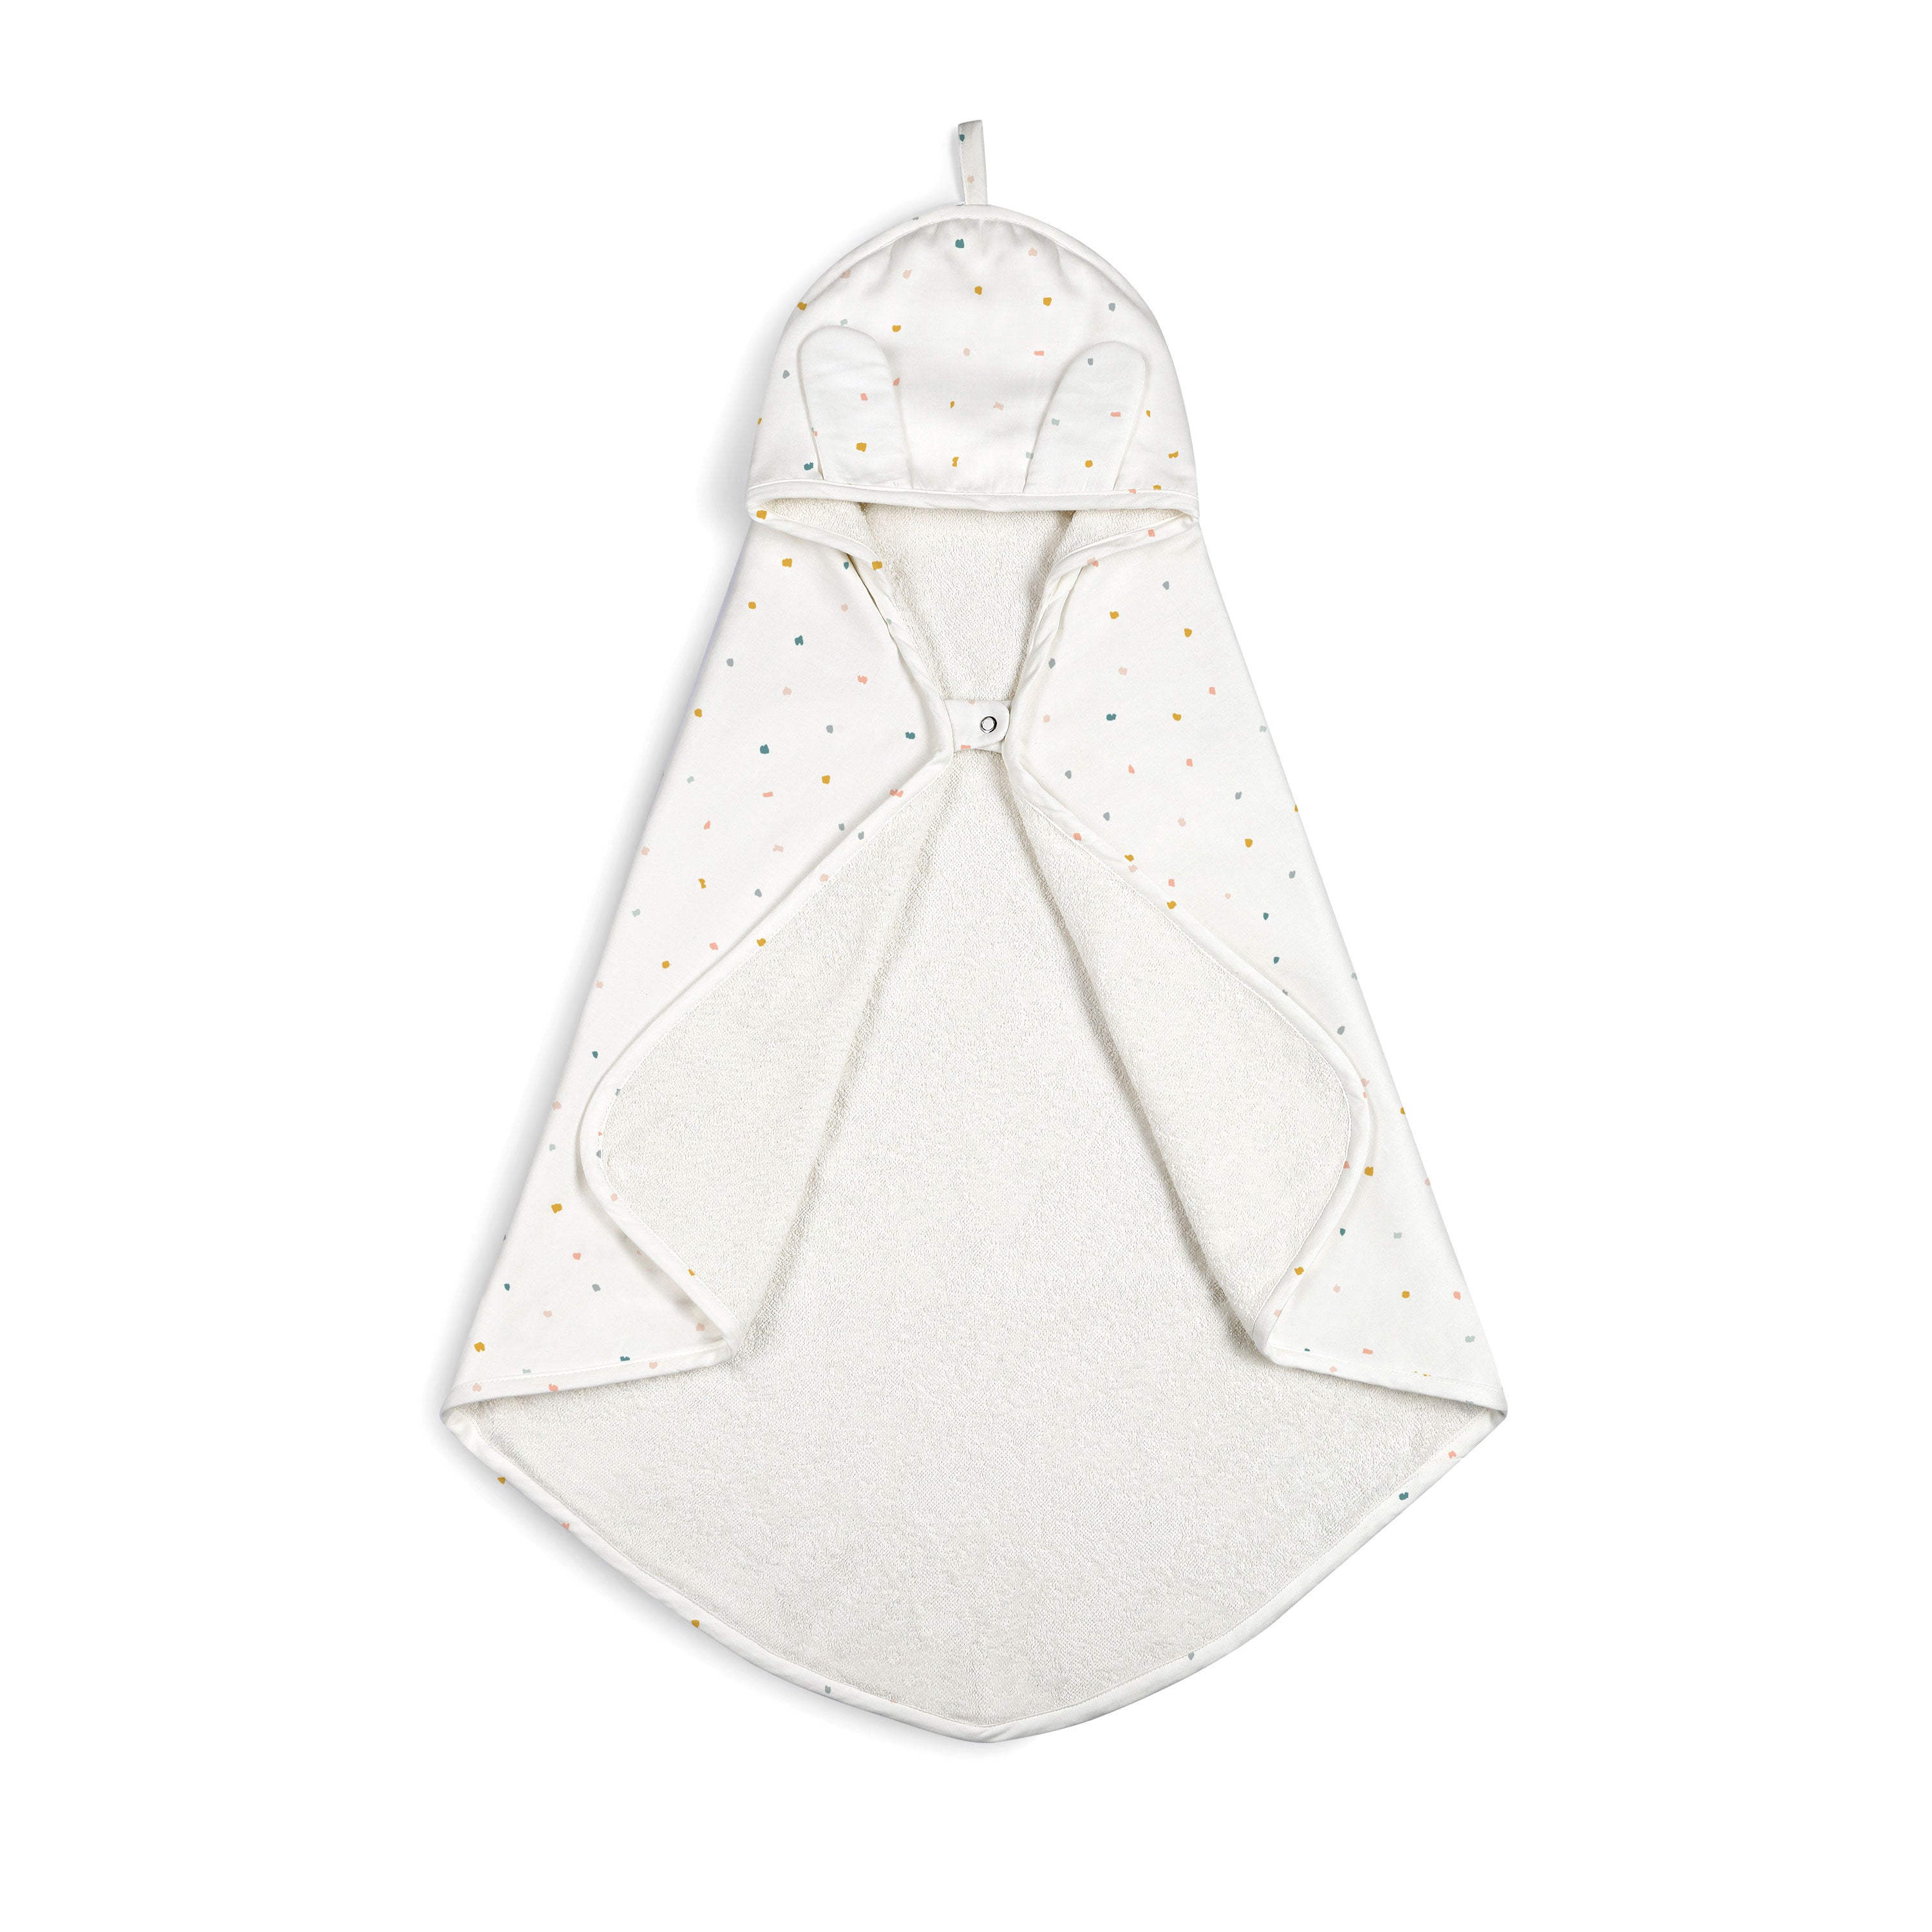 A Makemake Organics Organic Cotton Hooded Baby Towel & Poncho - Dotty with a white and multicolored polka dot pattern, designed in a sack-like shape with a hood, displayed on a white background.